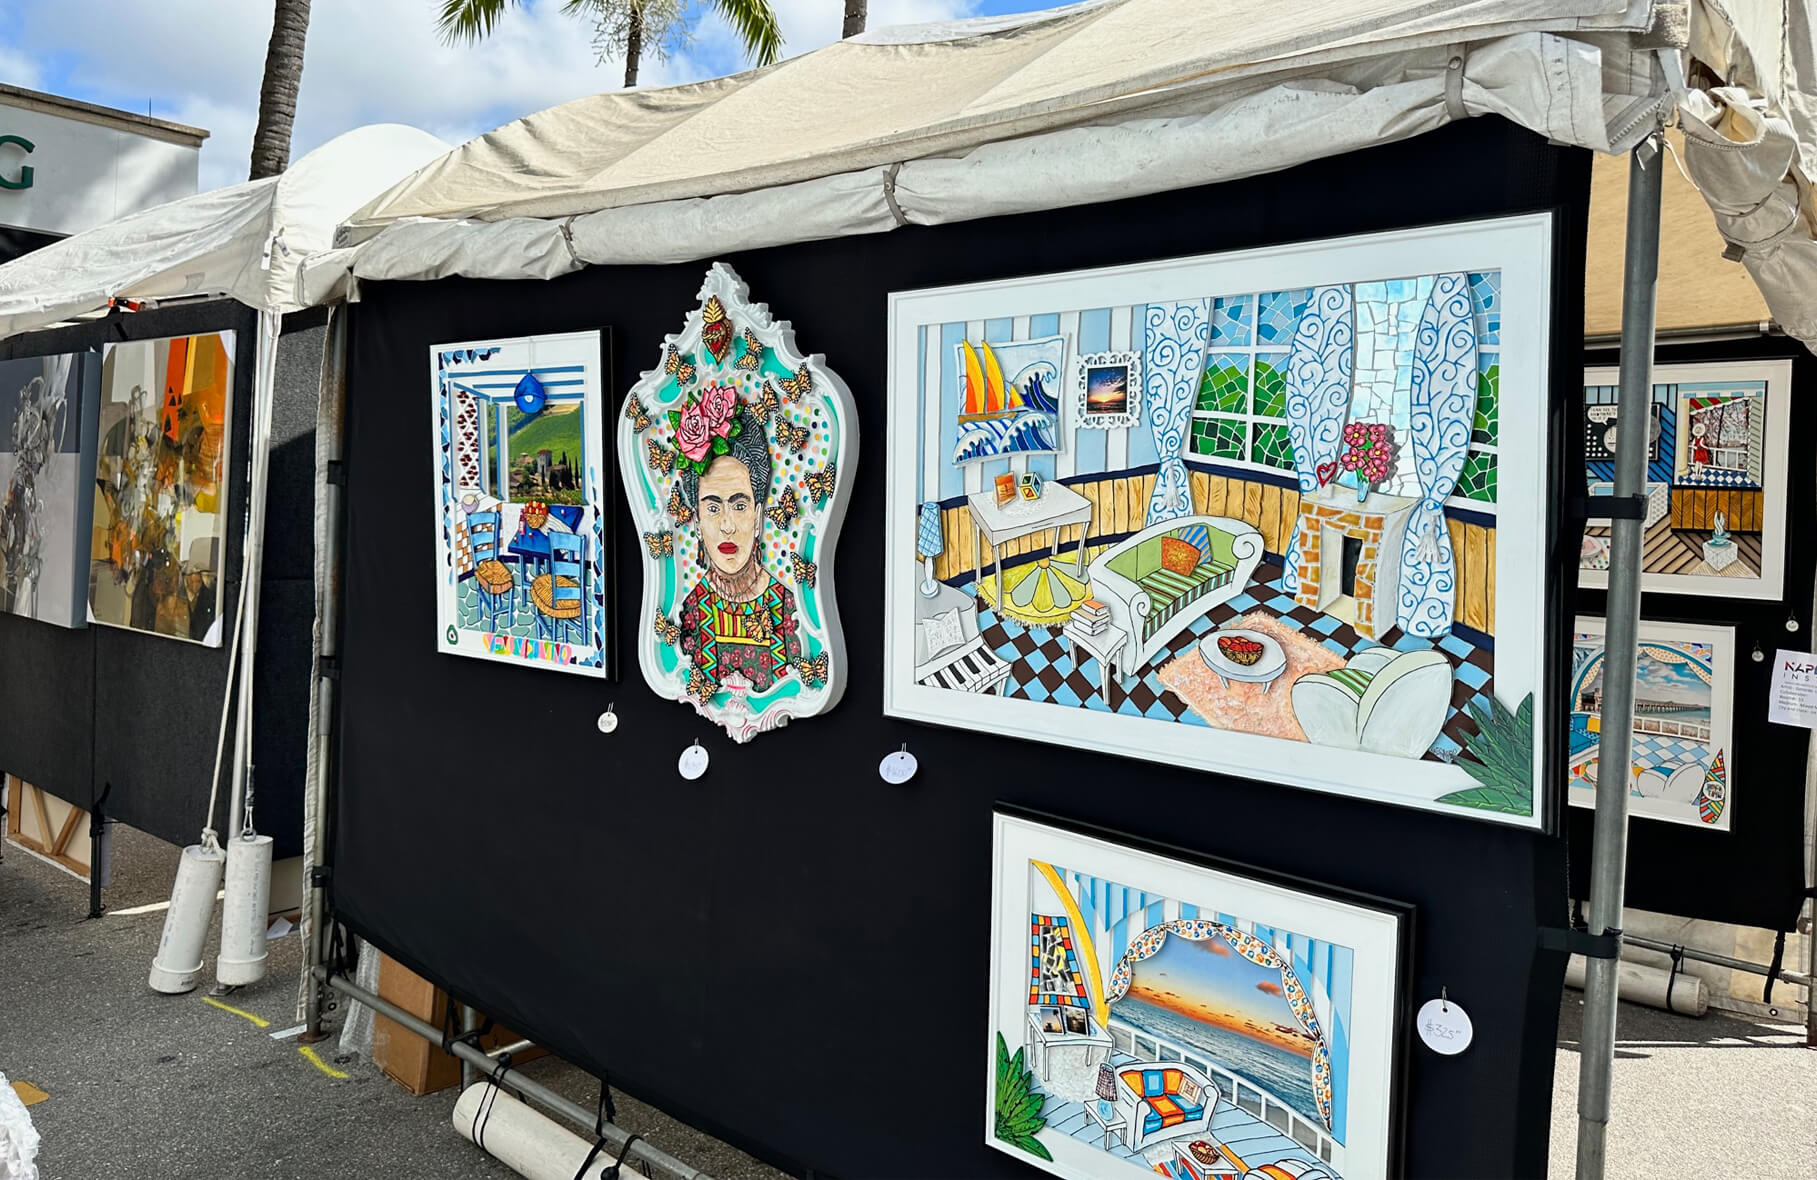 What to Do in Naples Florida - 2023 Weekend Guide - December 1 - 3, 2023 - Art on 5th